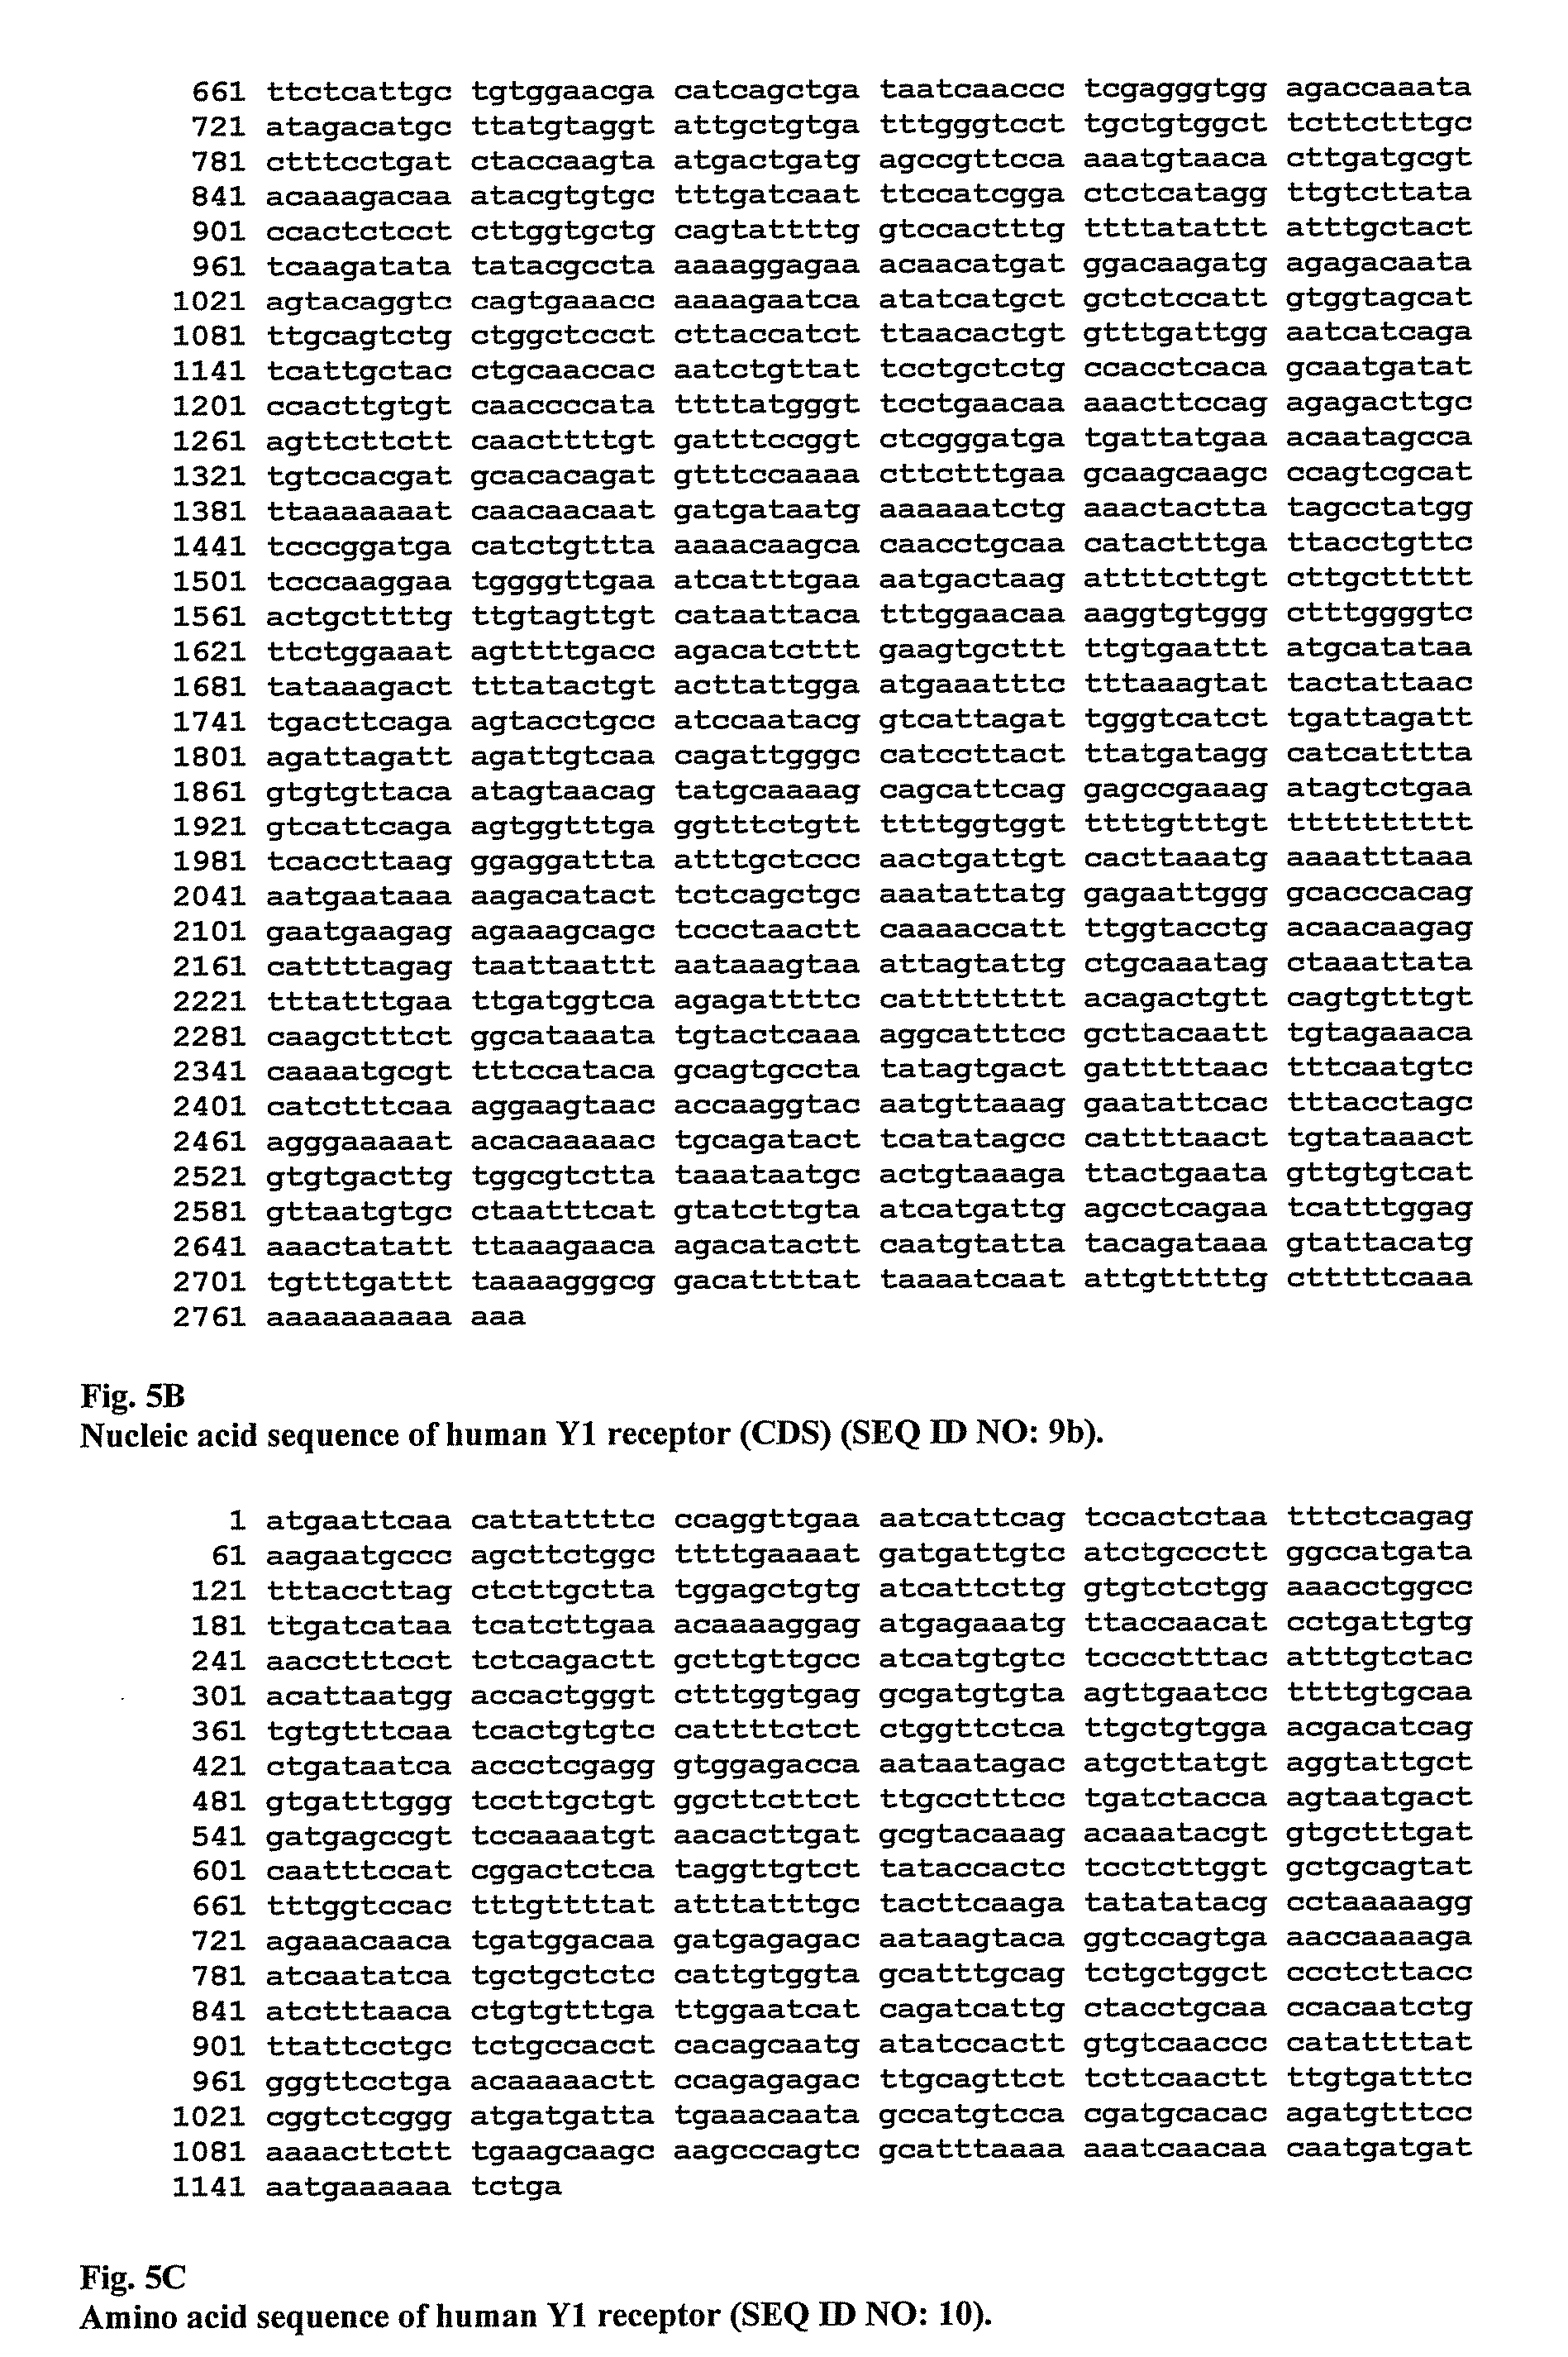 Use of nucleic acid sequences for the treatment of neuralogical and psychiatric diseases and compositions